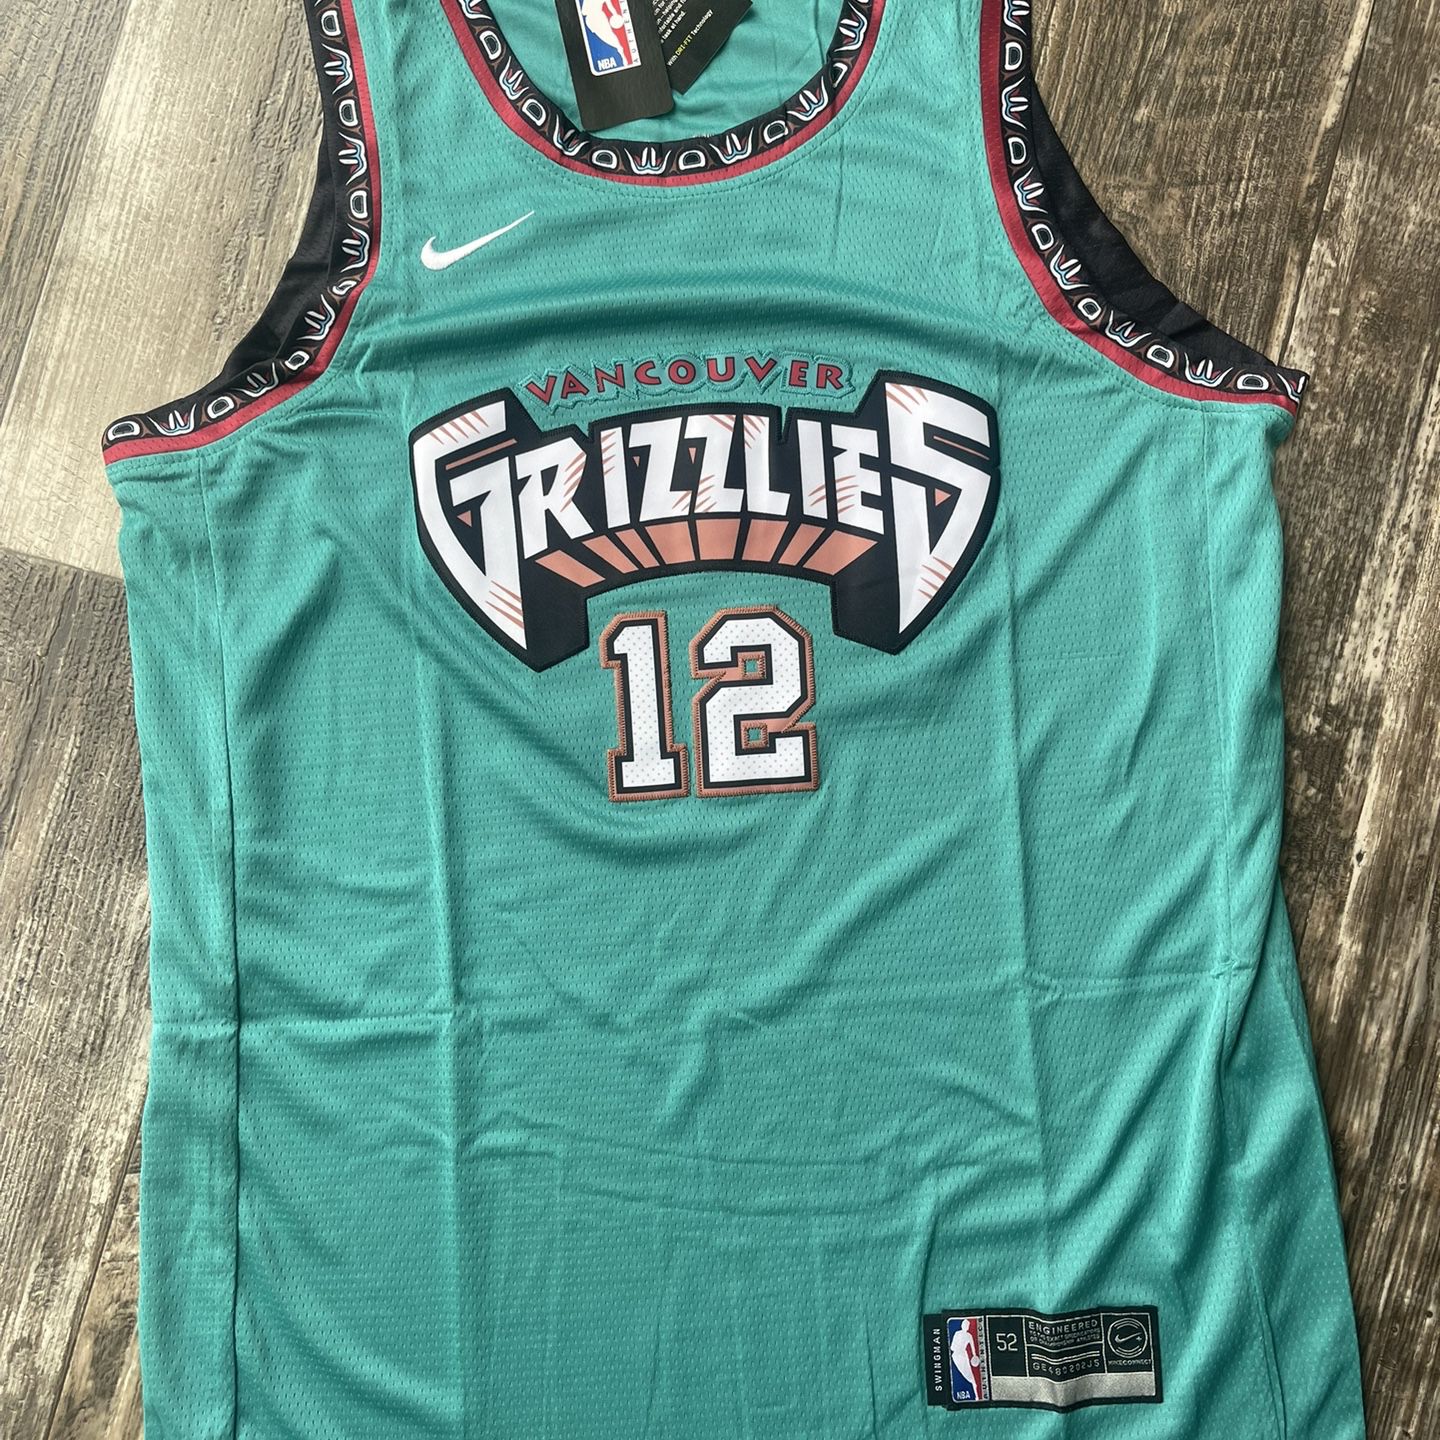 Ja Morant Vancouver Grizzlies Basketball Jersey Large for Sale in Myrtle  Beach, SC - OfferUp